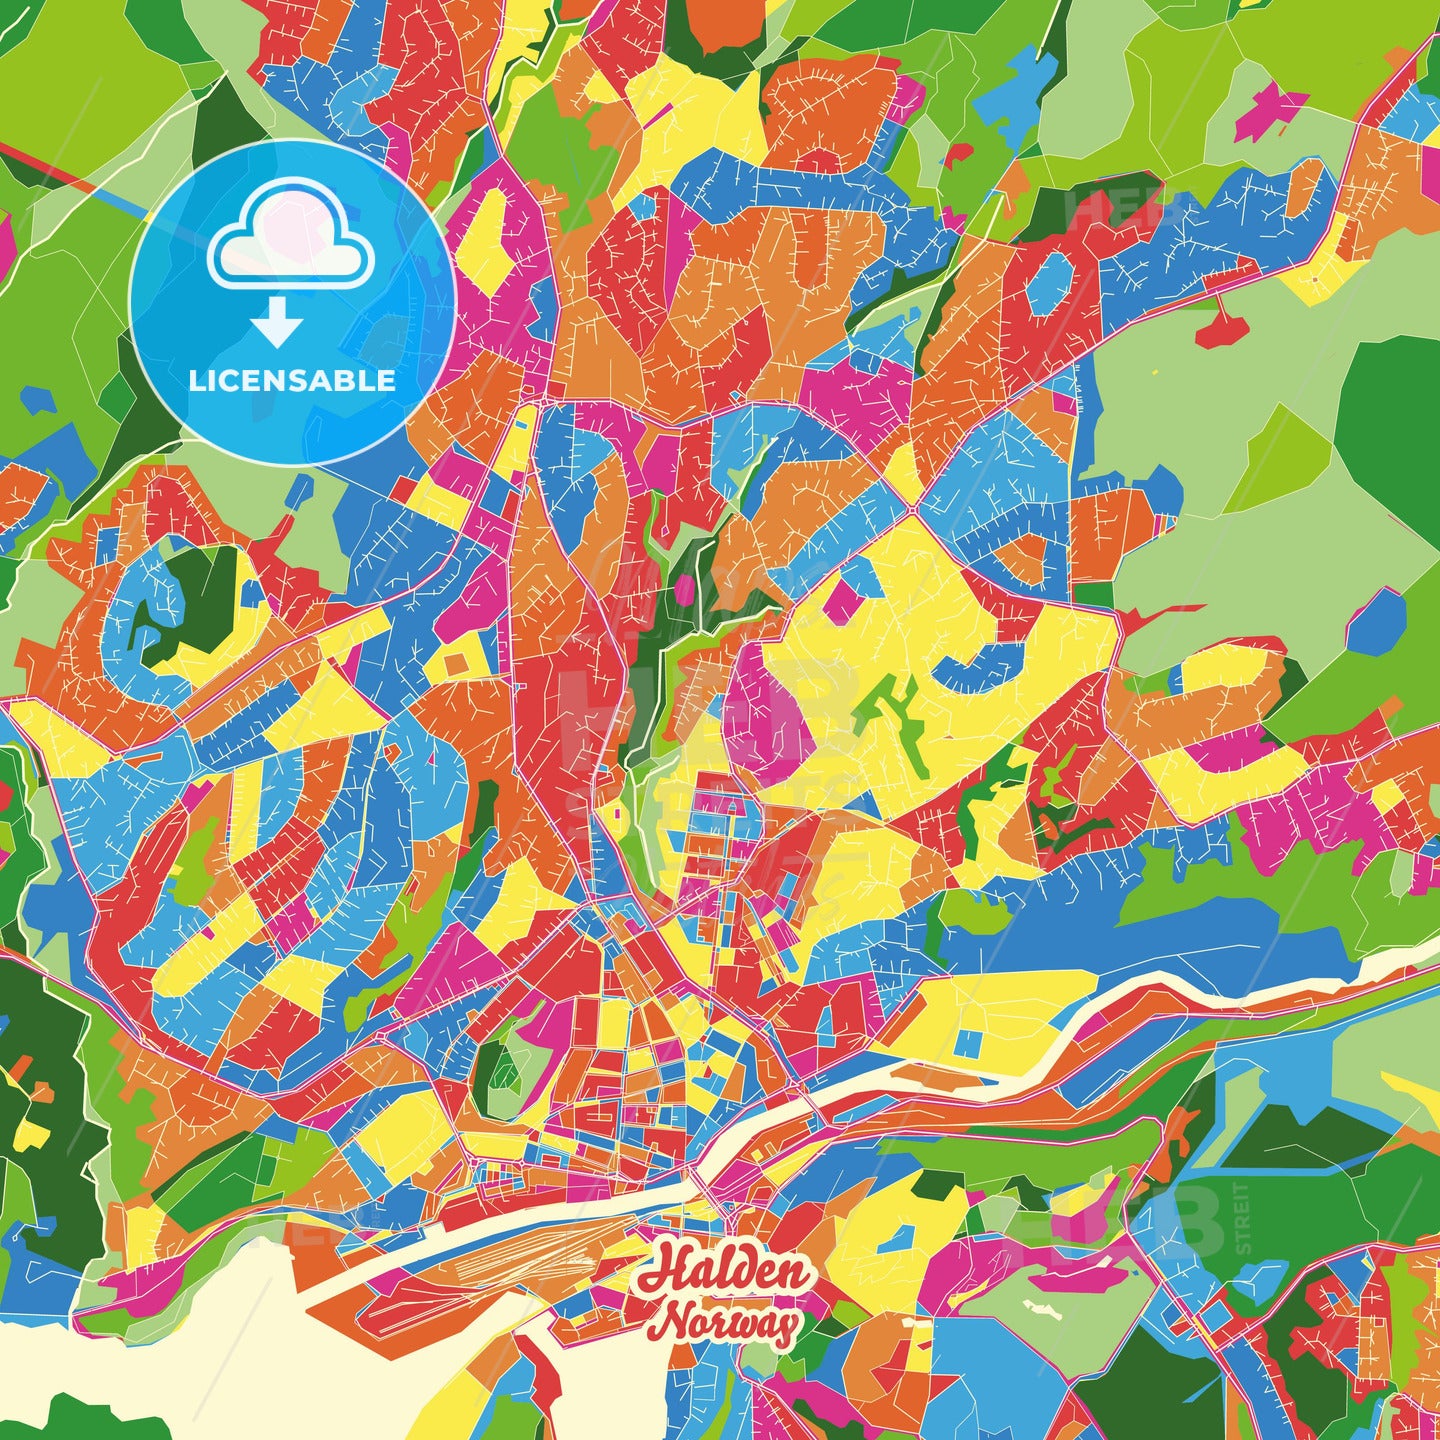 Halden, Norway Crazy Colorful Street Map Poster Template - HEBSTREITS Sketches